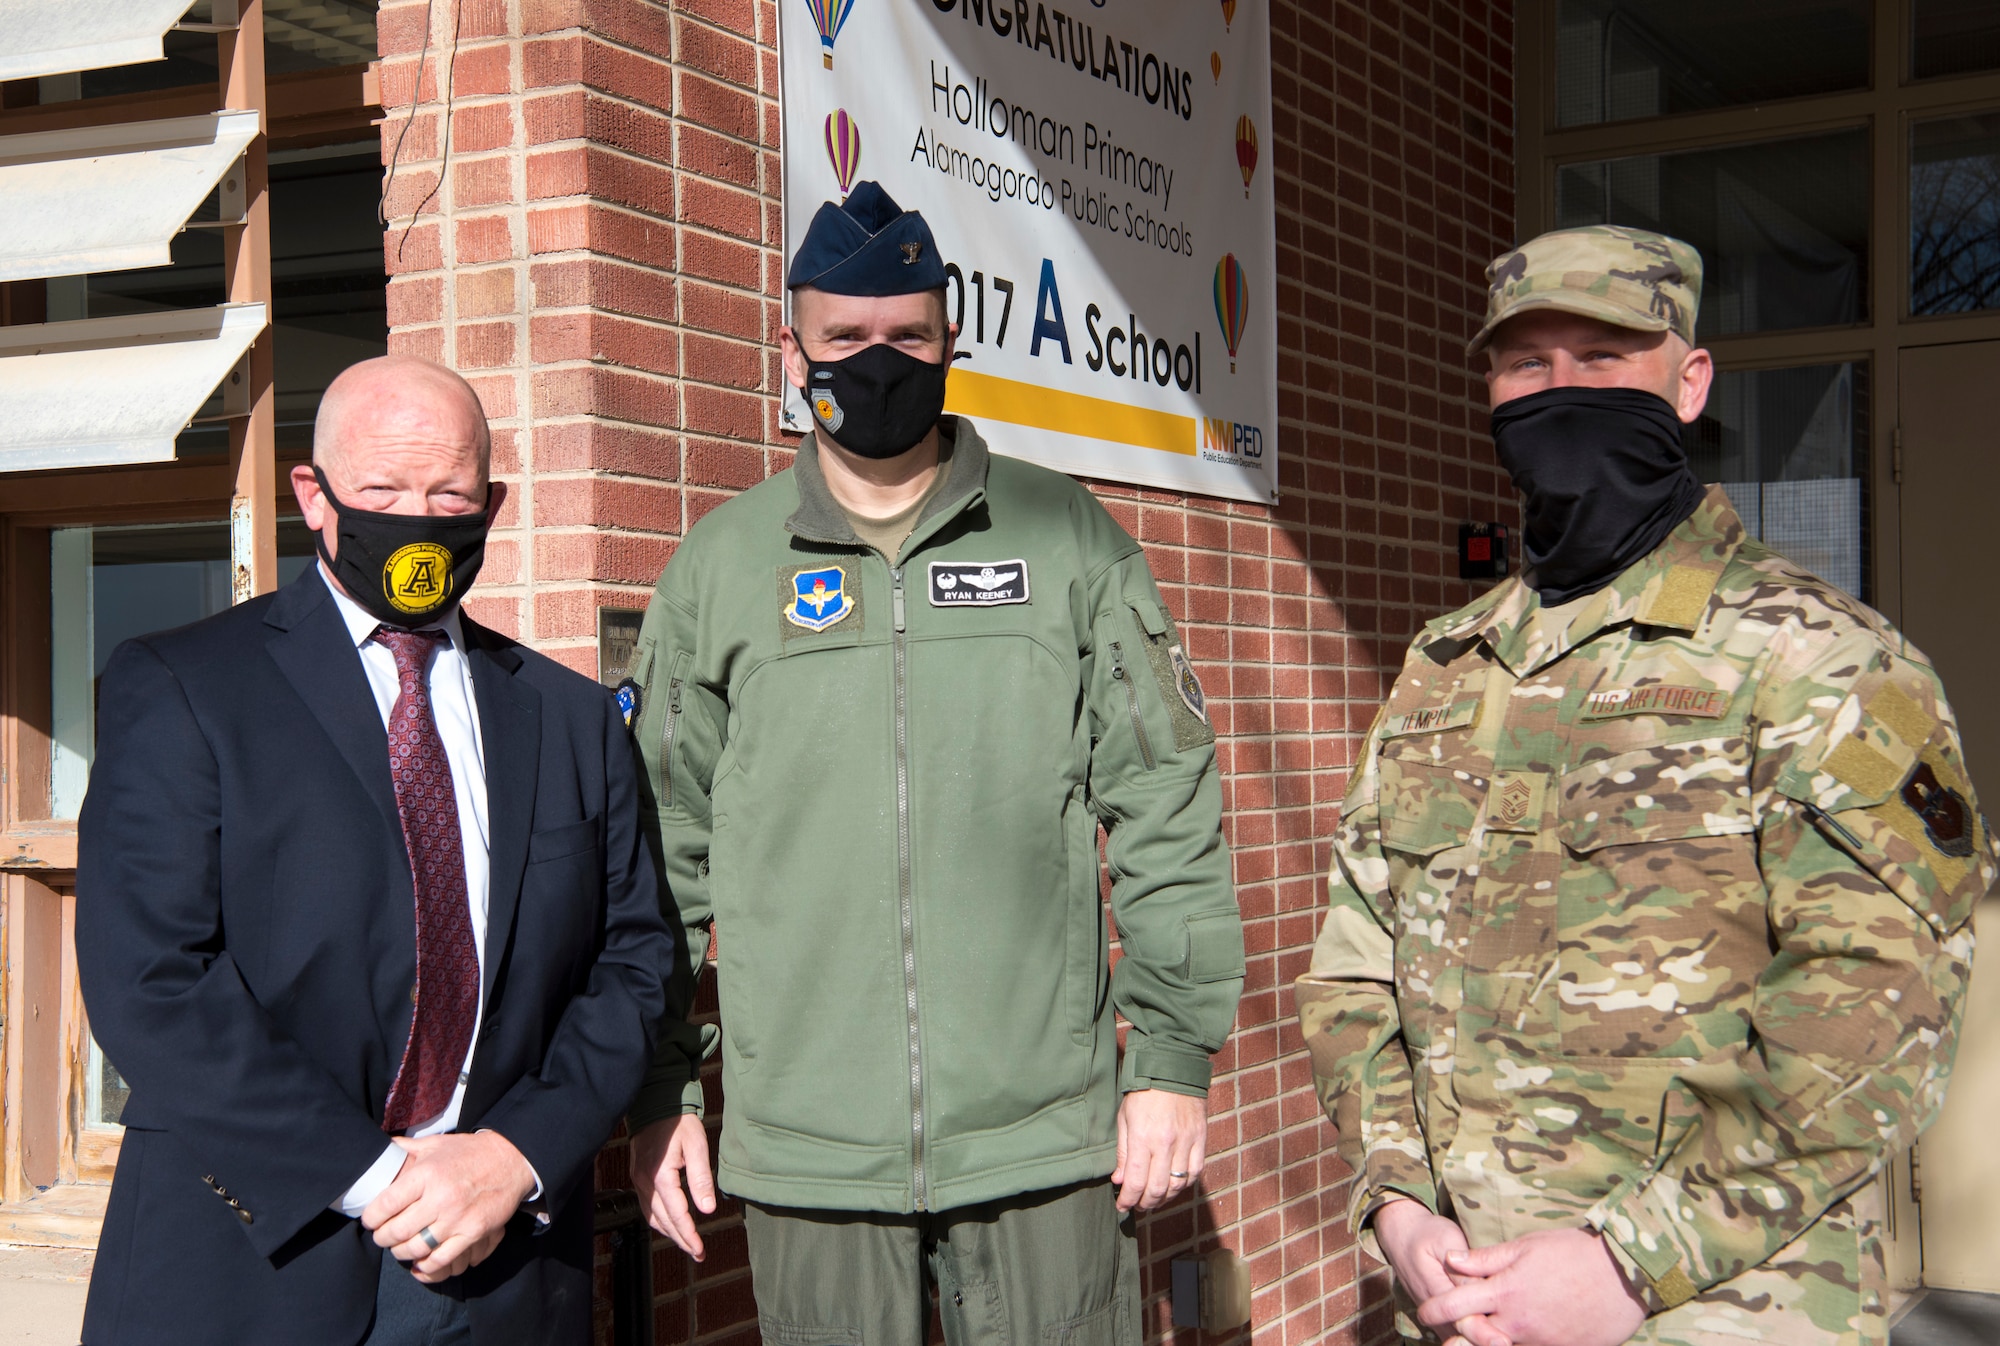 (From left to right) Jerrett Perry, Alamogordo Public School District superintendent, Col. Ryan Keeney, 49th Wing commander and Chief Master Sgt. Thomas Temple, 49th WG command chief, pose for a photo, Jan. 19, 2021, on Holloman Air Force Base, New Mexico. Holloman schools offer programs such as Anchored4Life, Deployed Kids Club and an on-site Military Family Life Counselor to support the unique culture of being a military child. (U.S. Air Force photo by Airman 1st Class Jessica Sanchez)